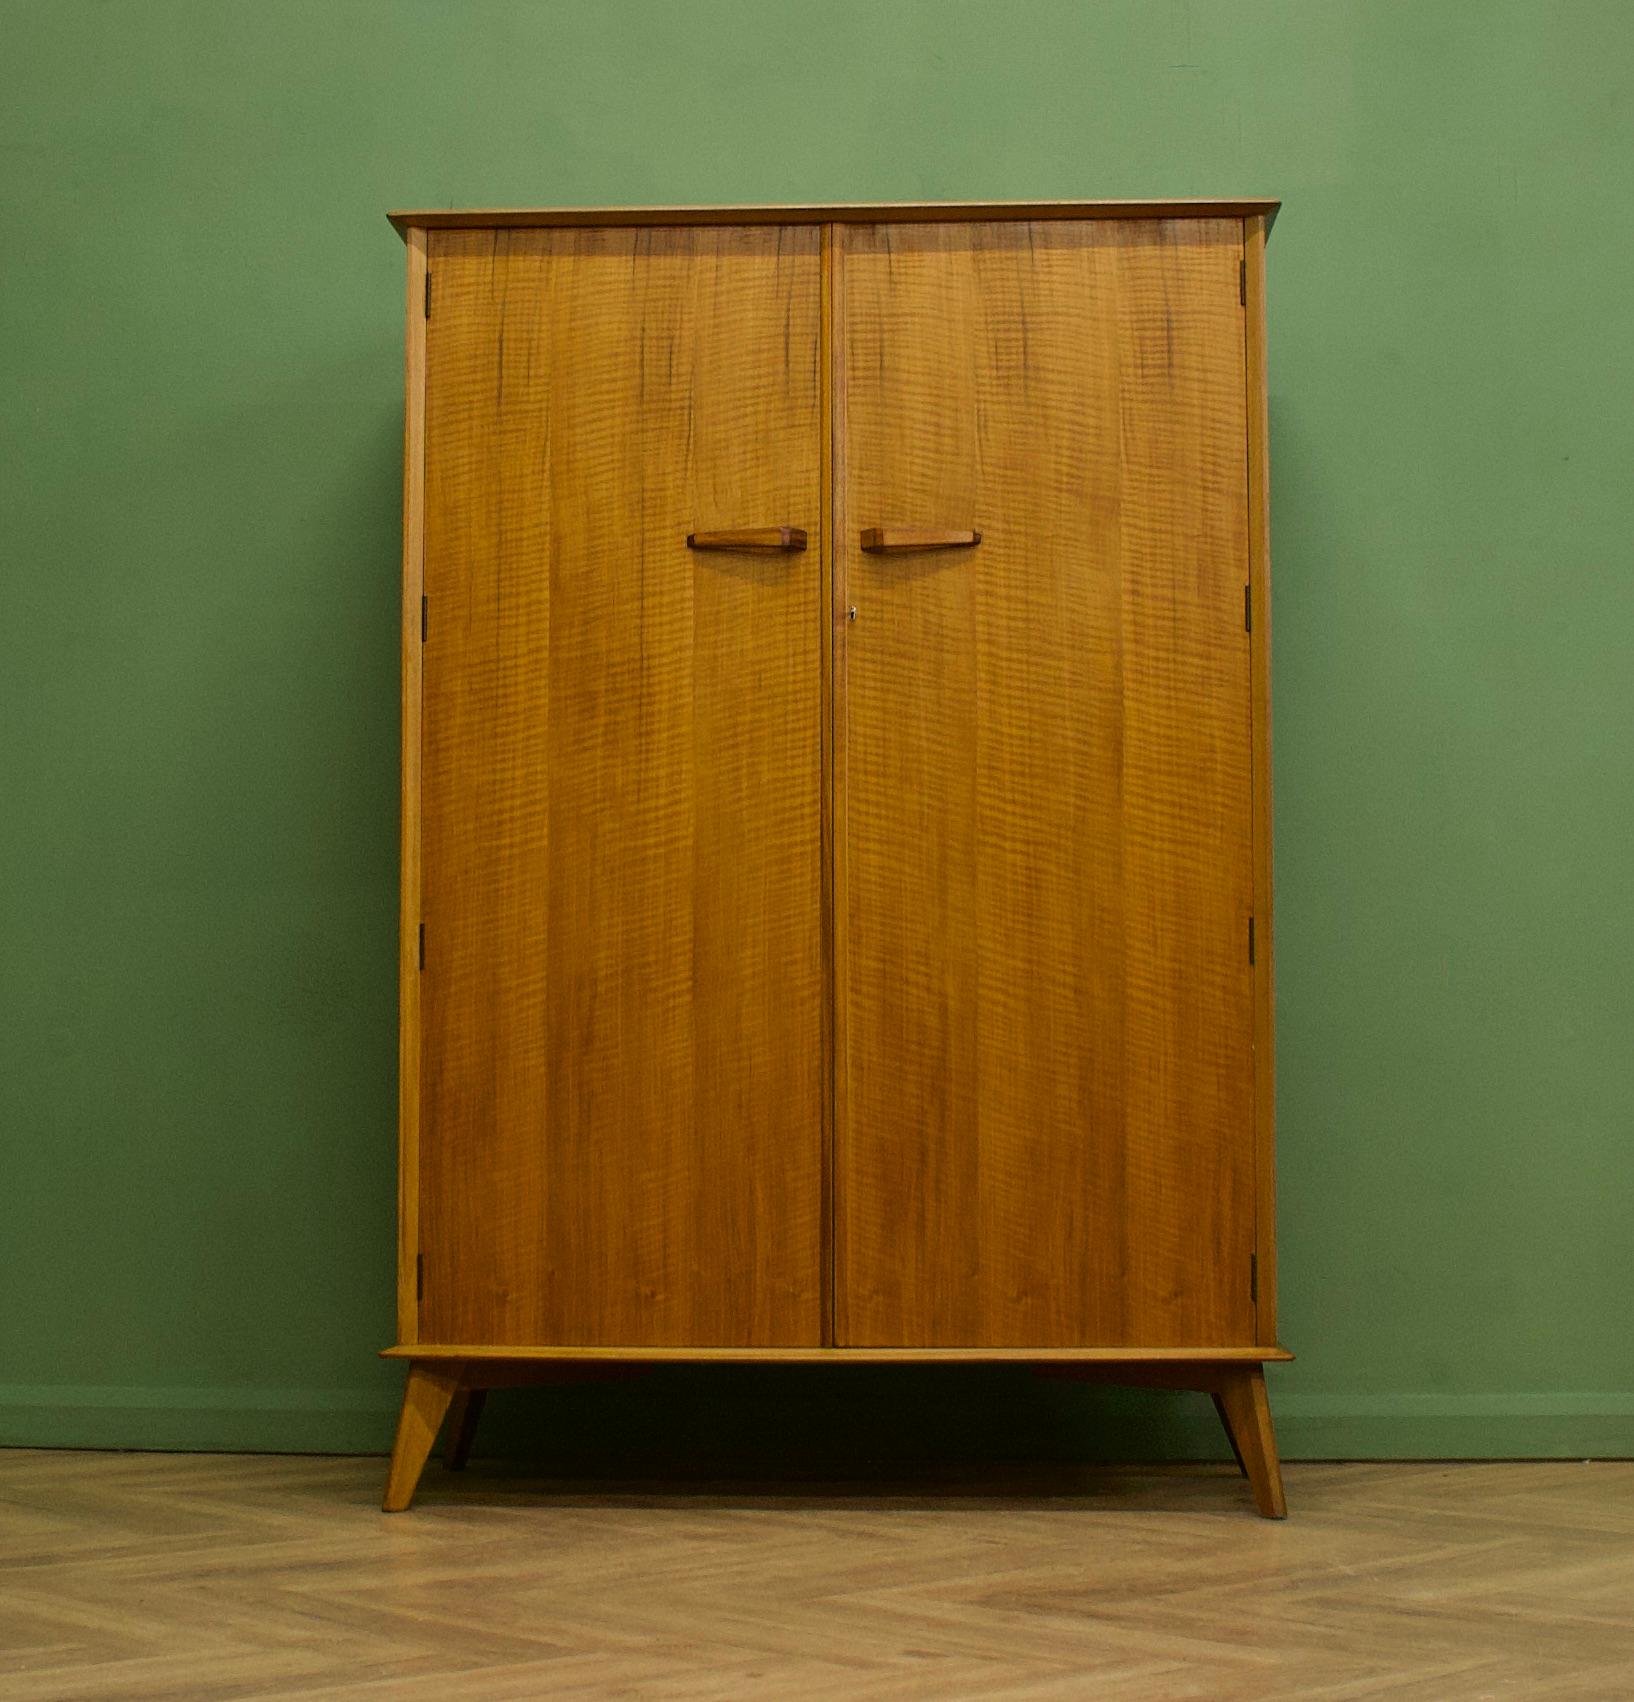 A walnut and teak freestanding wardrobe by Crown Furniture - circa 1960s
Internally there is a rail the full width
The attractive legs are slightly tapered and splayed and the handles are solid wood - complete with a working lock